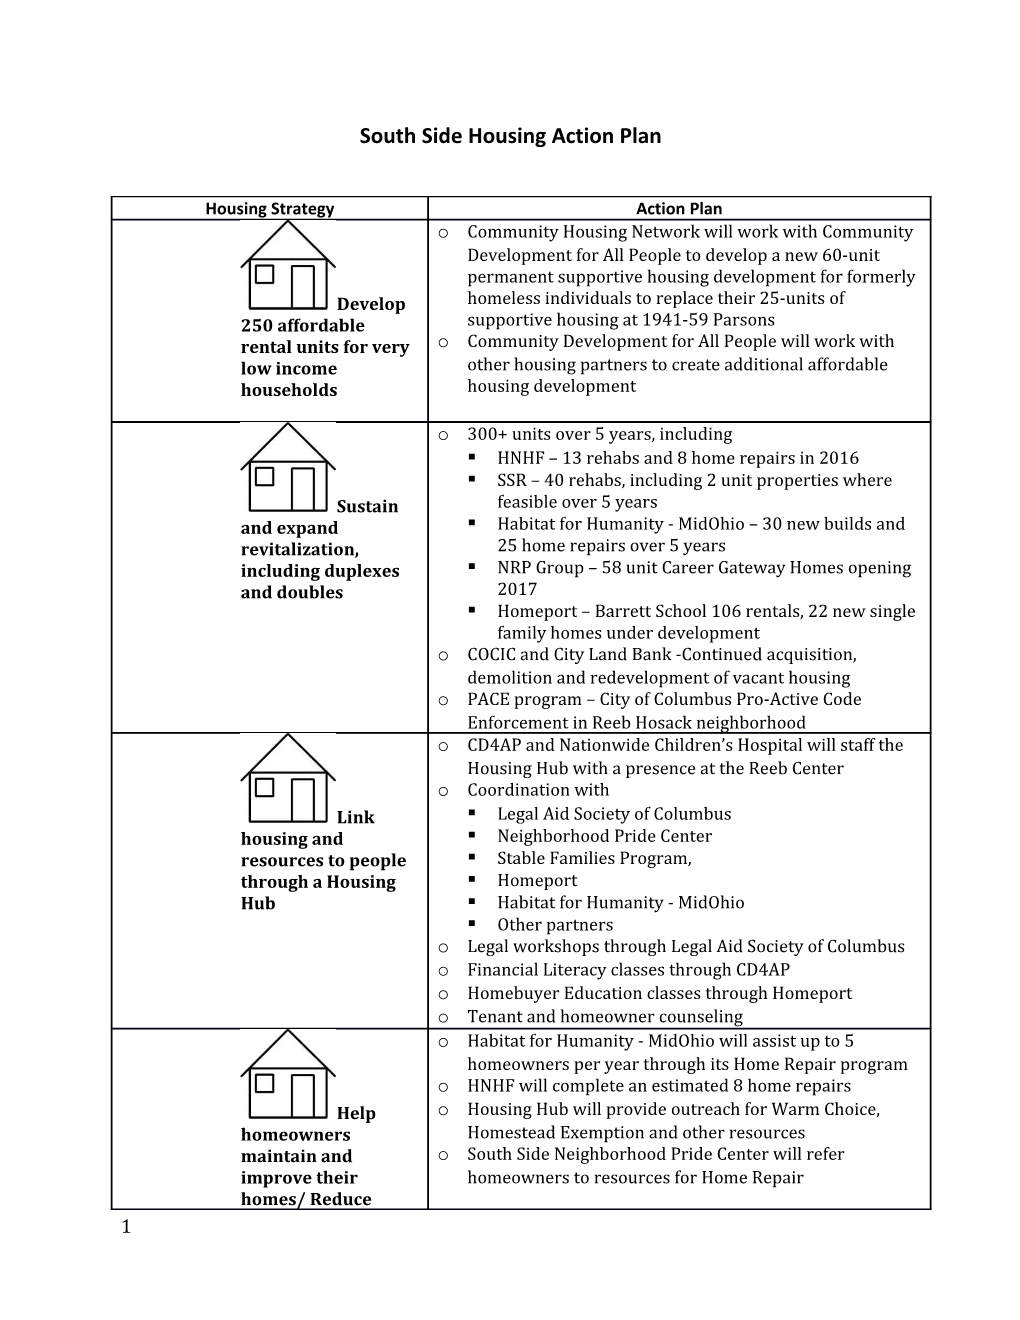 South Side Housing Action Plan